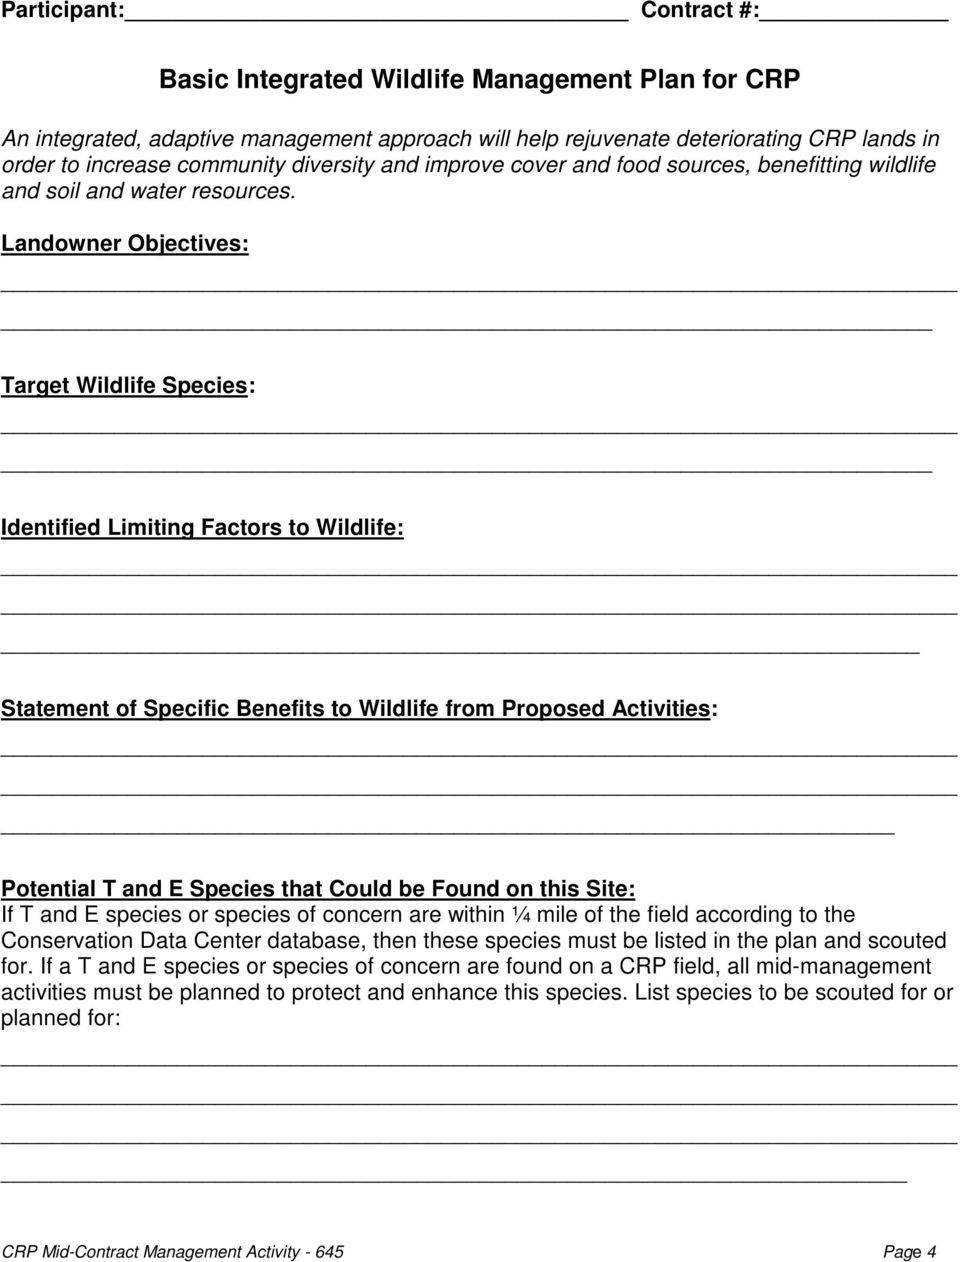 Landowner Objectives: Target Wildlife Species: Identified Limiting Factors to Wildlife: Statement of Specific Benefits to Wildlife from Proposed Activities: Potential T and E Species that Could be